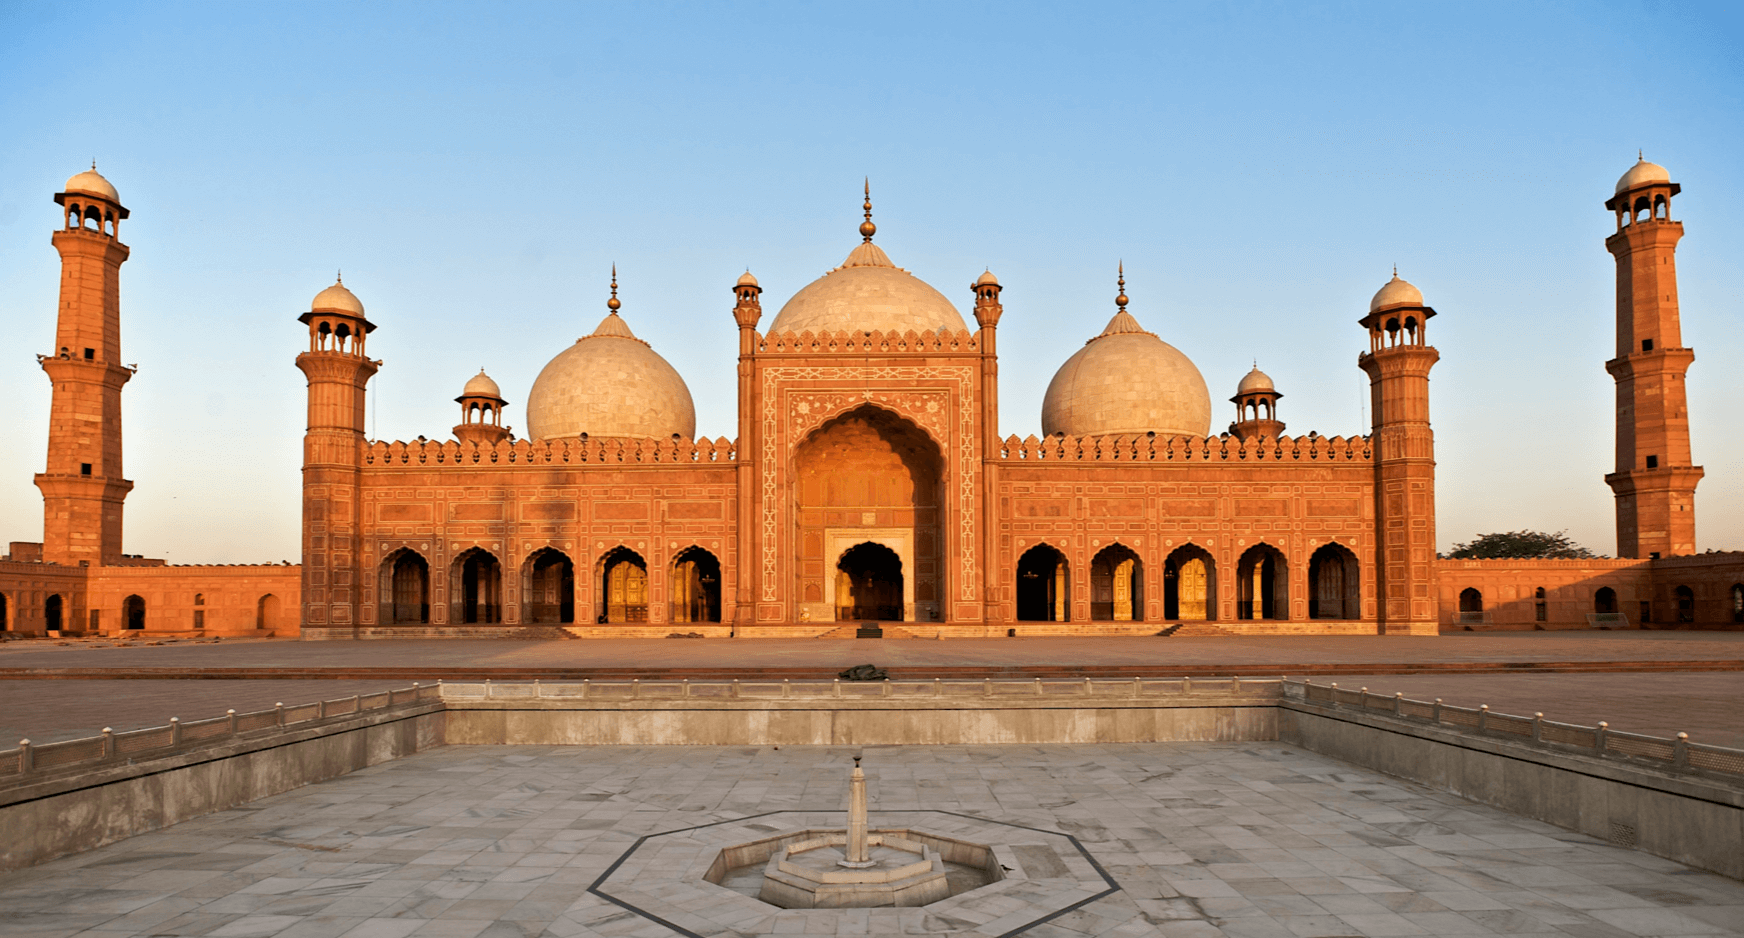 Flight deals from many UK cities to Lahore, Pakistan | Secret Flying